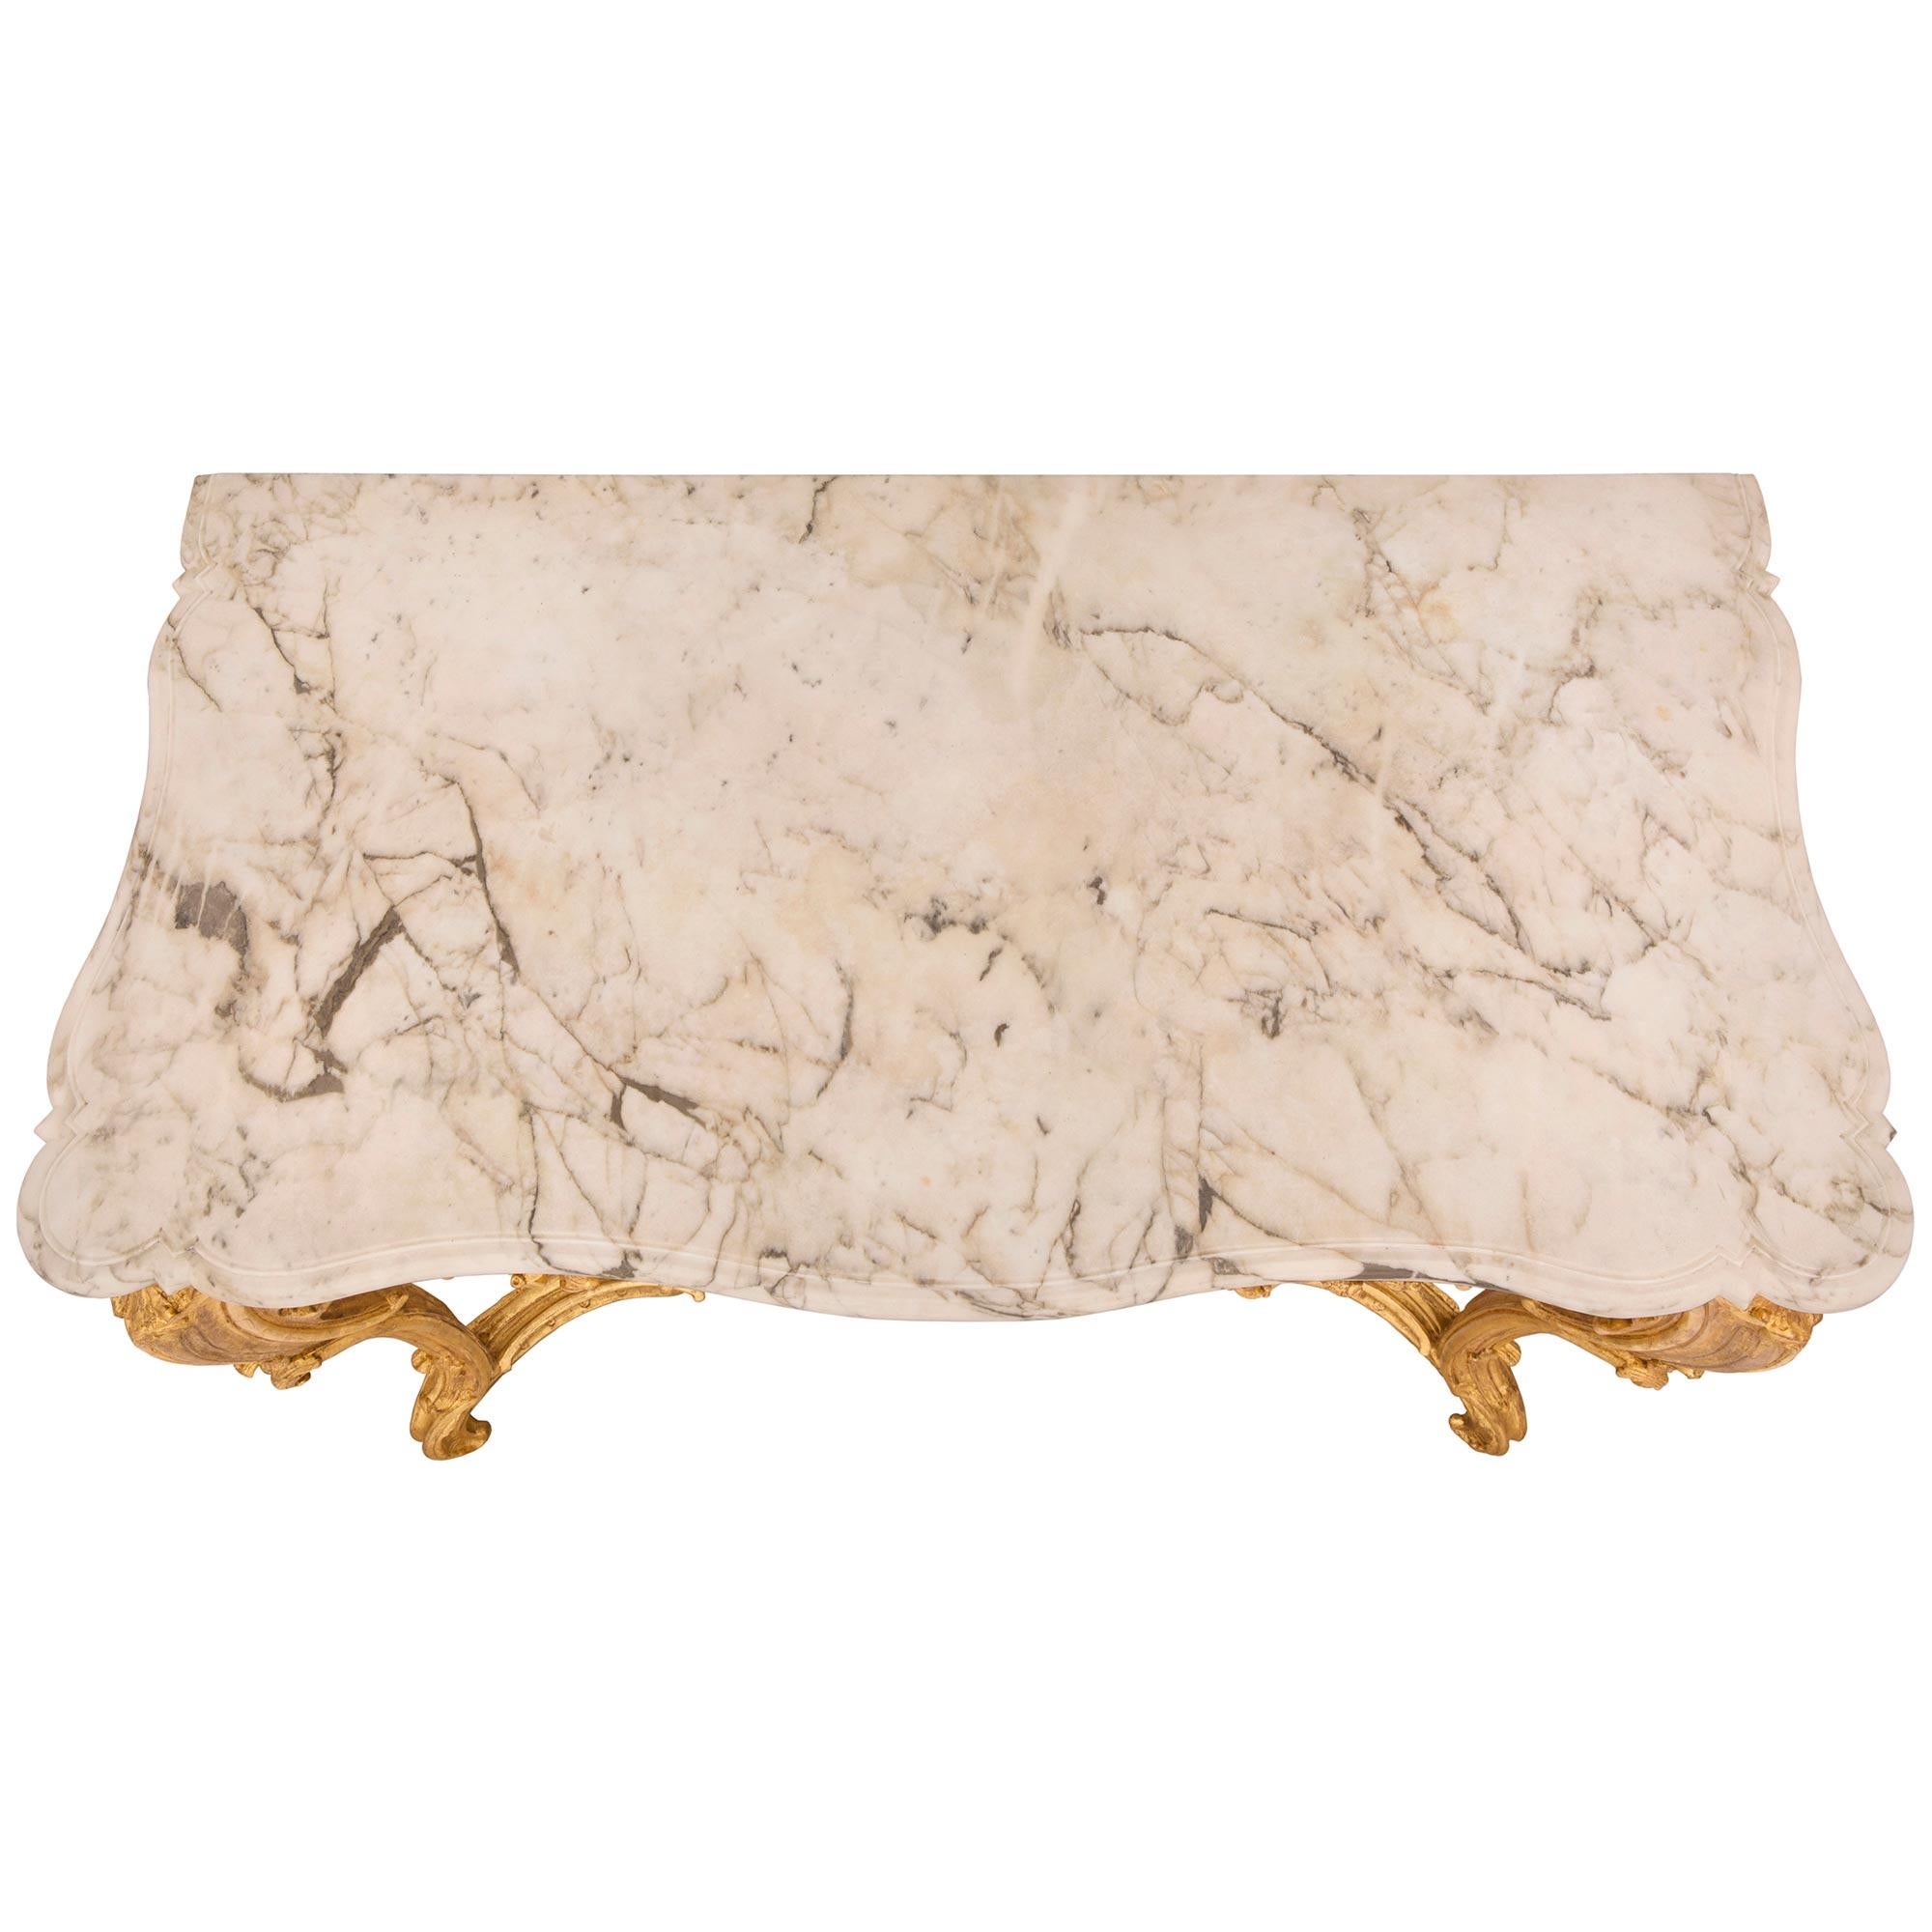 A stunning Italian 18th century Regence st. Louis XV period giltwood and Calacatta marble console. The freestanding console is raised by striking cabriole legs with elegant scrolled foliate feet, large acanthus leaves and beautiful richly carved